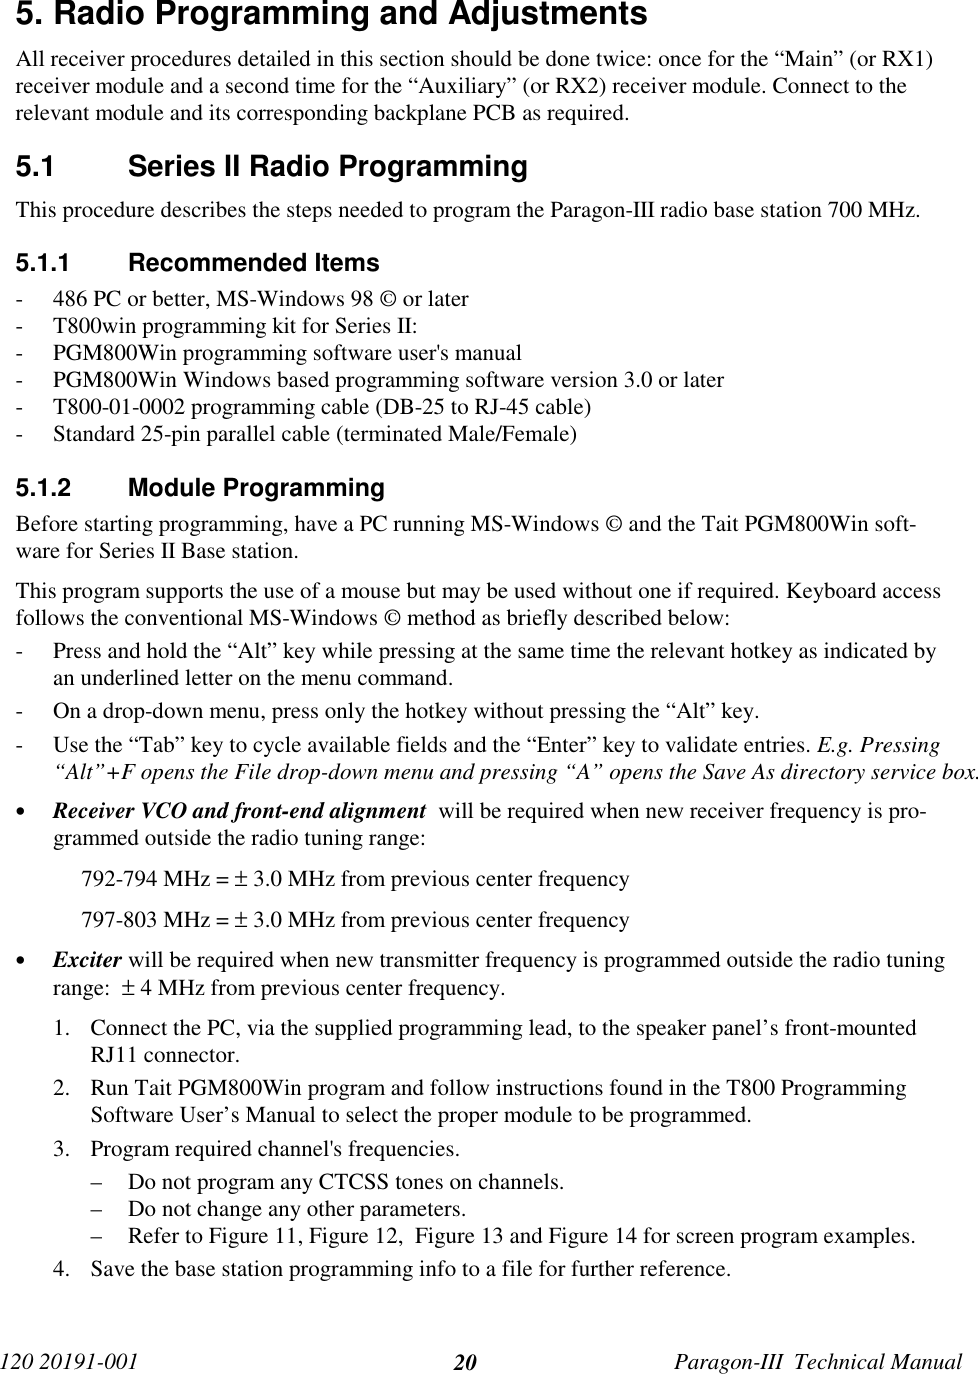 120 20191-001 Paragon-III  Technical Manual205. Radio Programming and AdjustmentsAll receiver procedures detailed in this section should be done twice: once for the “Main” (or RX1)receiver module and a second time for the “Auxiliary” (or RX2) receiver module. Connect to therelevant module and its corresponding backplane PCB as required.5.1  Series II Radio ProgrammingThis procedure describes the steps needed to program the Paragon-III radio base station 700 MHz.5.1.1 Recommended Items- 486 PC or better, MS-Windows 98 © or later- T800win programming kit for Series II:- PGM800Win programming software user&apos;s manual- PGM800Win Windows based programming software version 3.0 or later- T800-01-0002 programming cable (DB-25 to RJ-45 cable)- Standard 25-pin parallel cable (terminated Male/Female)5.1.2 Module ProgrammingBefore starting programming, have a PC running MS-Windows © and the Tait PGM800Win soft-ware for Series II Base station.This program supports the use of a mouse but may be used without one if required. Keyboard accessfollows the conventional MS-Windows © method as briefly described below:- Press and hold the “Alt” key while pressing at the same time the relevant hotkey as indicated byan underlined letter on the menu command.- On a drop-down menu, press only the hotkey without pressing the “Alt” key.- Use the “Tab” key to cycle available fields and the “Enter” key to validate entries. E.g. Pressing“Alt”+F opens the File drop-down menu and pressing “A” opens the Save As directory service box.• Receiver VCO and front-end alignment  will be required when new receiver frequency is pro-grammed outside the radio tuning range:792-794 MHz = ± 3.0 MHz from previous center frequency797-803 MHz = ± 3.0 MHz from previous center frequency• Exciter will be required when new transmitter frequency is programmed outside the radio tuningrange:  ± 4 MHz from previous center frequency.1. Connect the PC, via the supplied programming lead, to the speaker panel’s front-mountedRJ11 connector.2. Run Tait PGM800Win program and follow instructions found in the T800 ProgrammingSoftware User’s Manual to select the proper module to be programmed.3. Program required channel&apos;s frequencies.– Do not program any CTCSS tones on channels.– Do not change any other parameters.– Refer to Figure 11, Figure 12,  Figure 13 and Figure 14 for screen program examples.4. Save the base station programming info to a file for further reference.